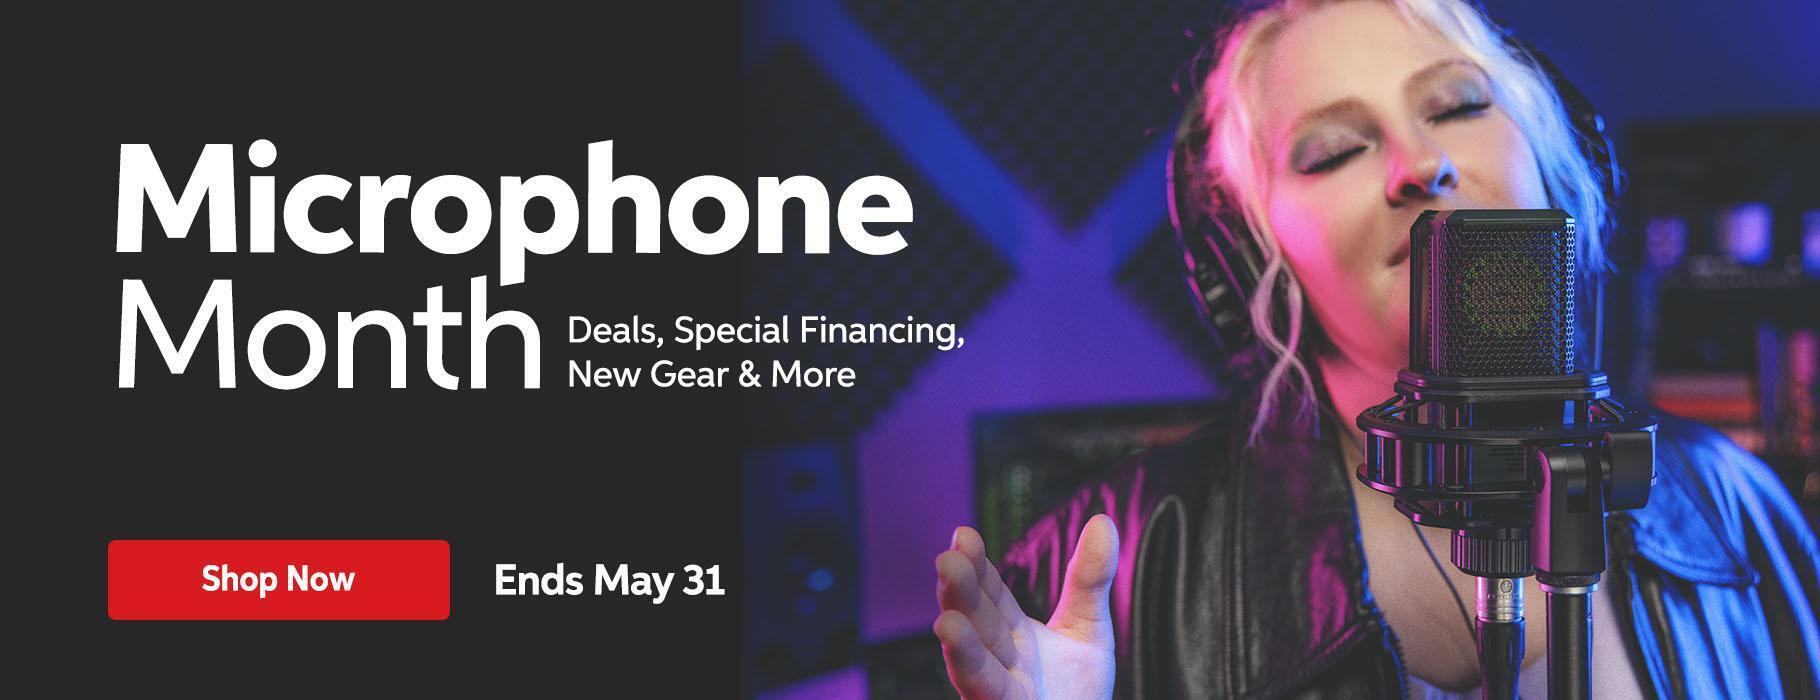 Microphone Month, Now thru May 31